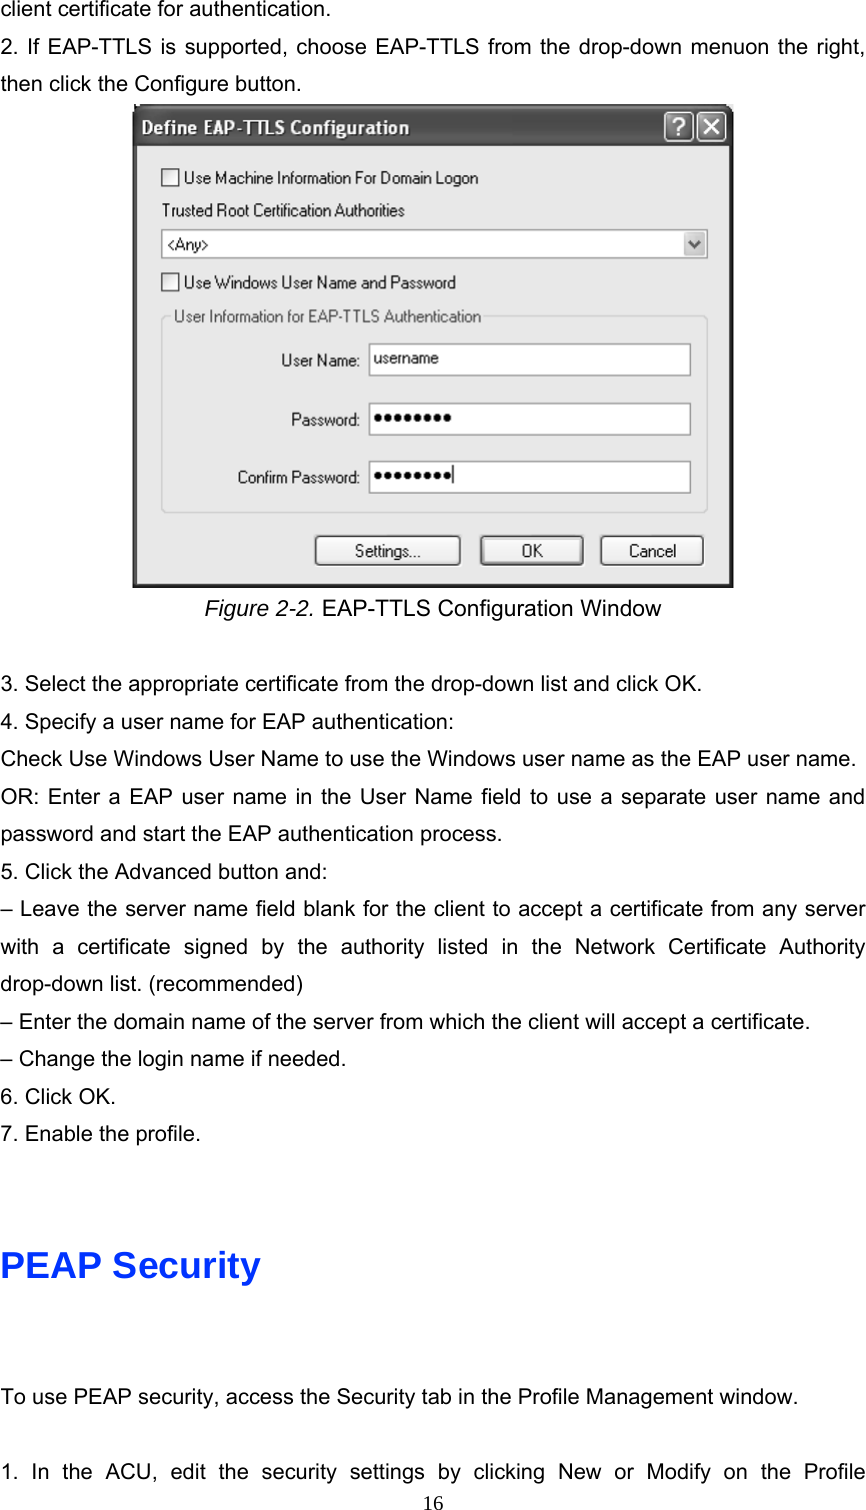 client certificate for authentication. 2. If EAP-TTLS is supported, choose EAP-TTLS from the drop-down menuon the right, then click the Configure button.  Figure 2-2. EAP-TTLS Configuration Window  3. Select the appropriate certificate from the drop-down list and click OK. 4. Specify a user name for EAP authentication: Check Use Windows User Name to use the Windows user name as the EAP user name. OR: Enter a EAP user name in the User Name field to use a separate user name and password and start the EAP authentication process. 5. Click the Advanced button and: – Leave the server name field blank for the client to accept a certificate from any server with a certificate signed by the authority listed in the Network Certificate Authority drop-down list. (recommended) – Enter the domain name of the server from which the client will accept a certificate. – Change the login name if needed. 6. Click OK. 7. Enable the profile.   PEAP Security  To use PEAP security, access the Security tab in the Profile Management window.  1. In the ACU, edit the security settings by clicking New or Modify on the Profile  16